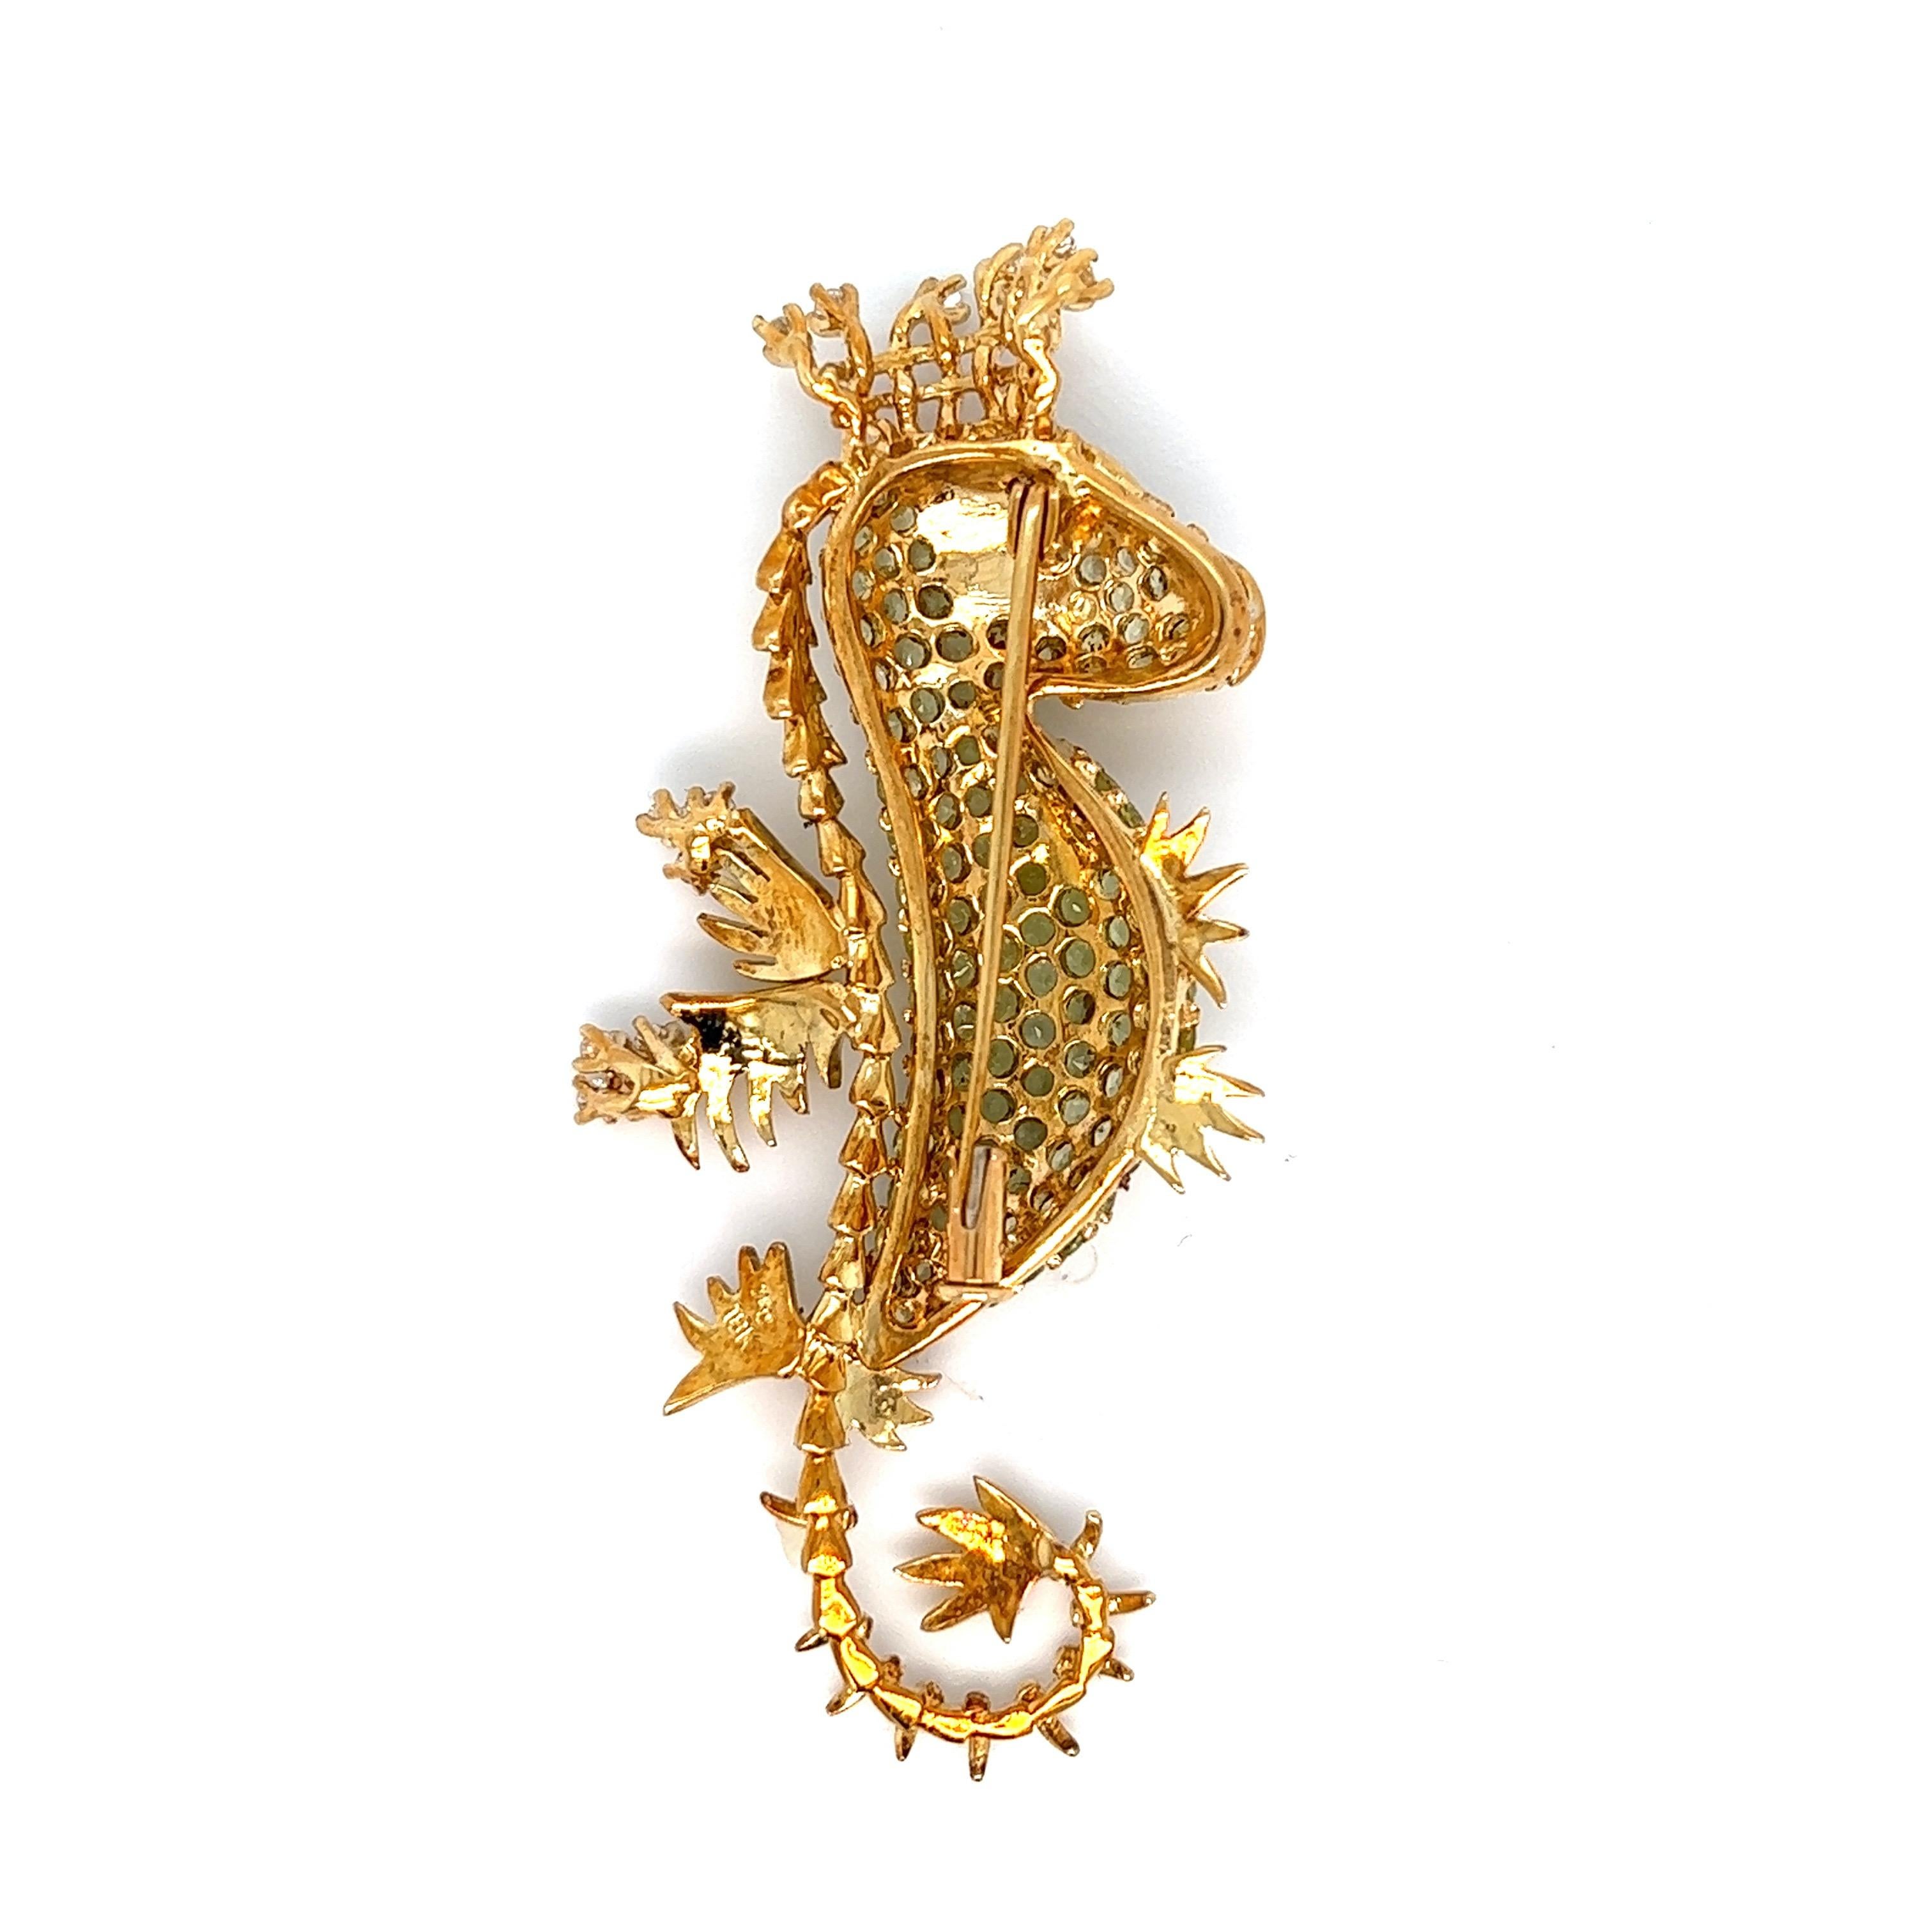 Seahorse peridot diamond gold brooch; marked 750, 18K

Round-cut diamonds of approximately 1.95 carat, peridot stones of approximately 4 carats, 18 karat yellow gold

Size: width 1.13 inch, length 2.5 inches
Total weight: 16.9 grams